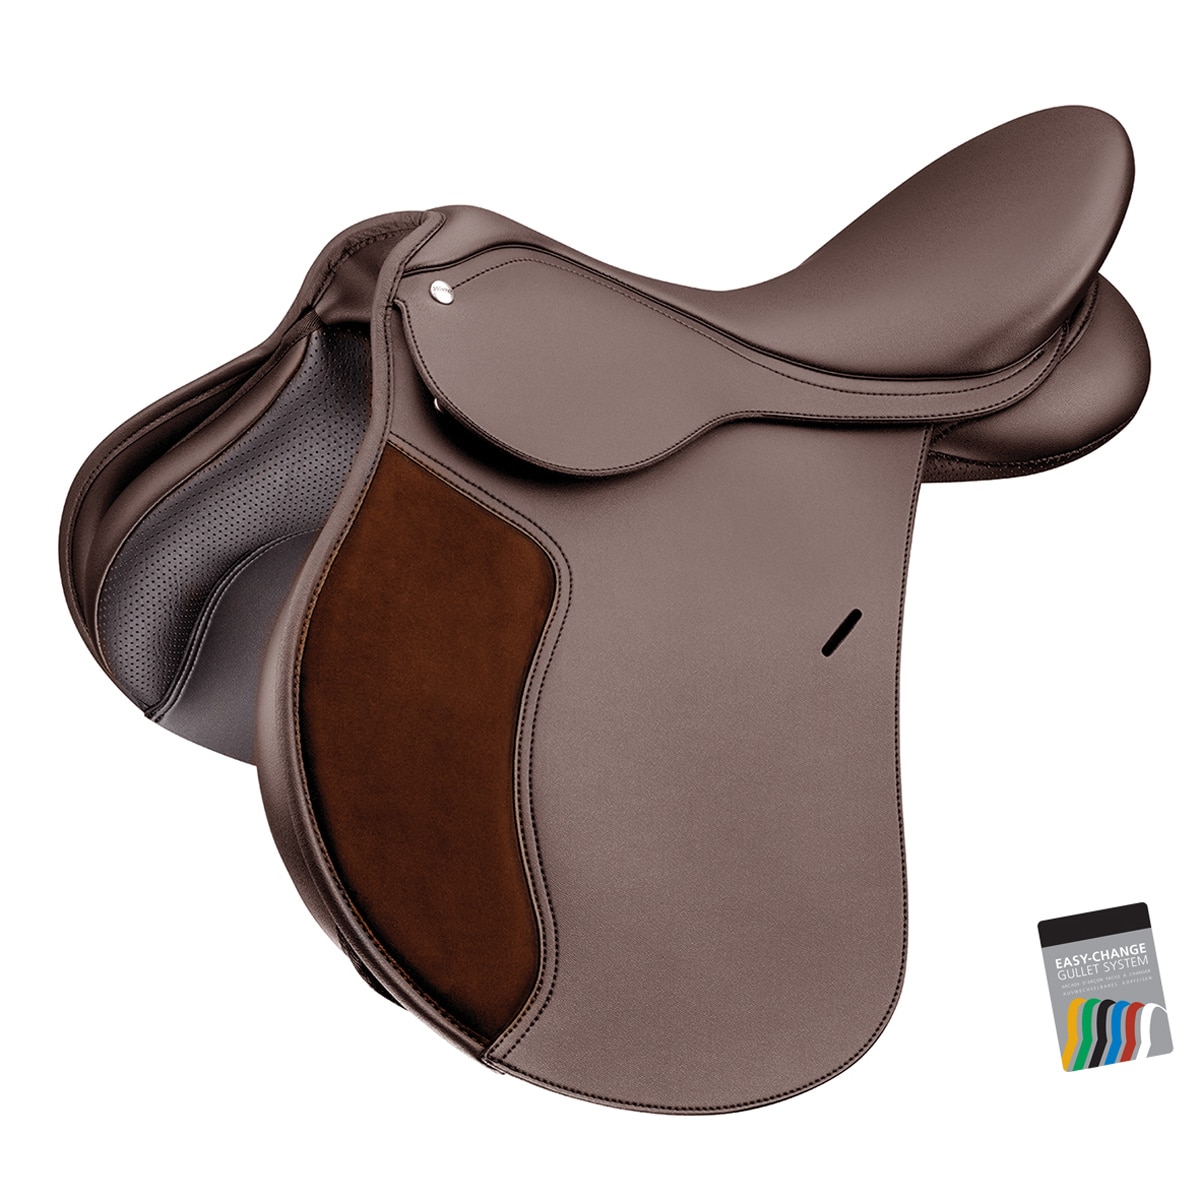 SYNTHETIC LEATHER  ALL PURPOSE HORSE SADDLE EXTRA WIDE FIT PLAIN BLACK & BROWN 